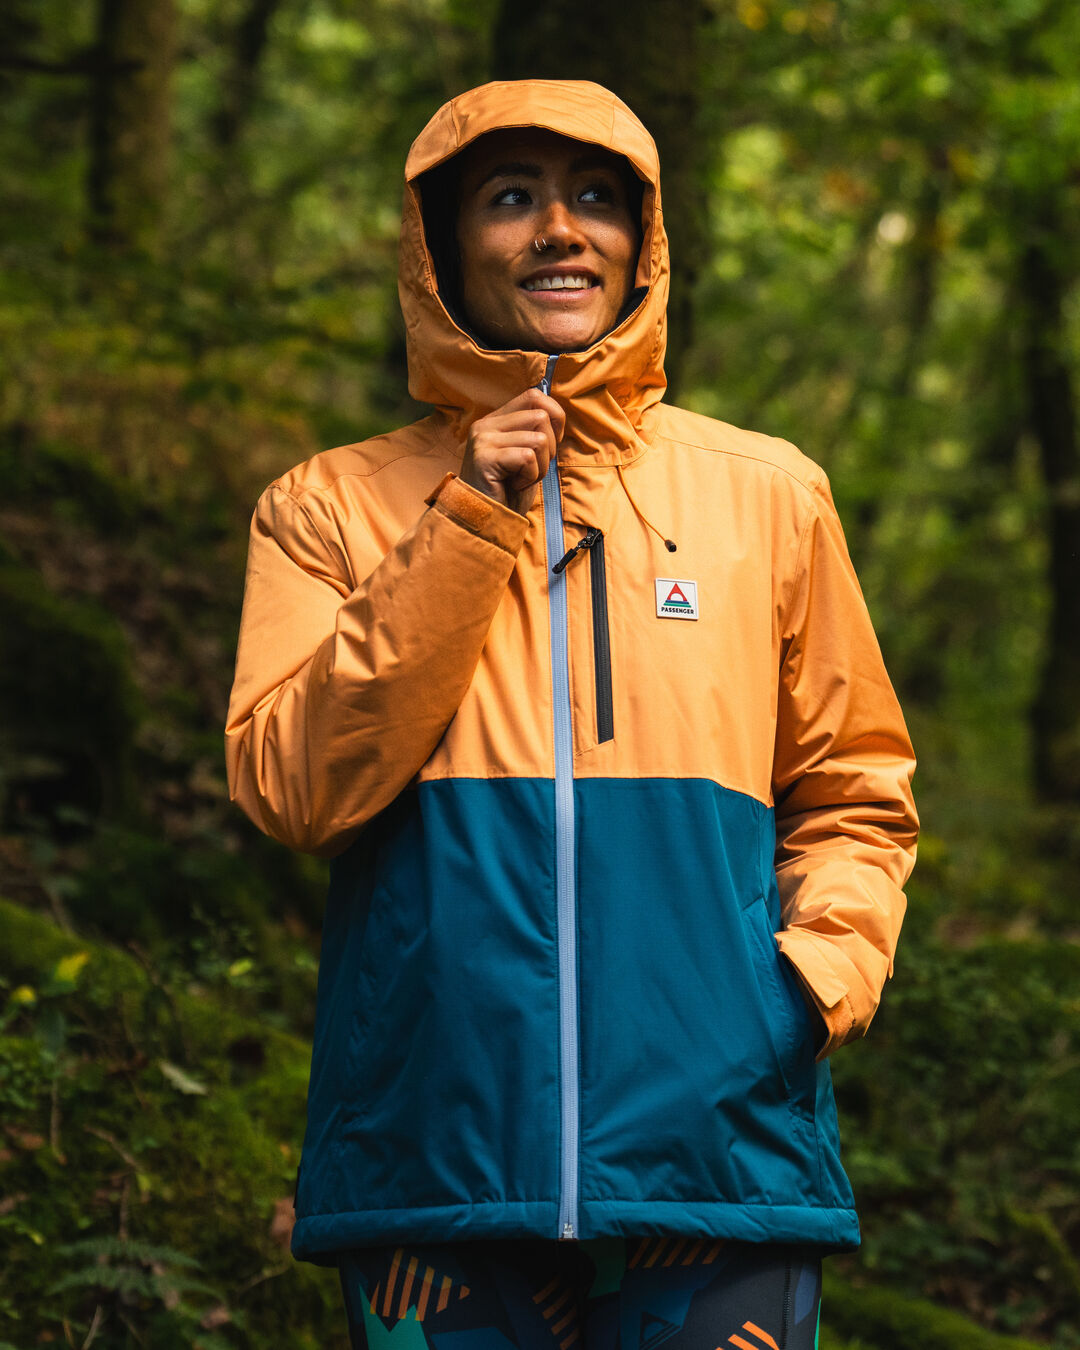 Terrain Insulated Water Resistant Jacket - Corsair Blue/ Apricot